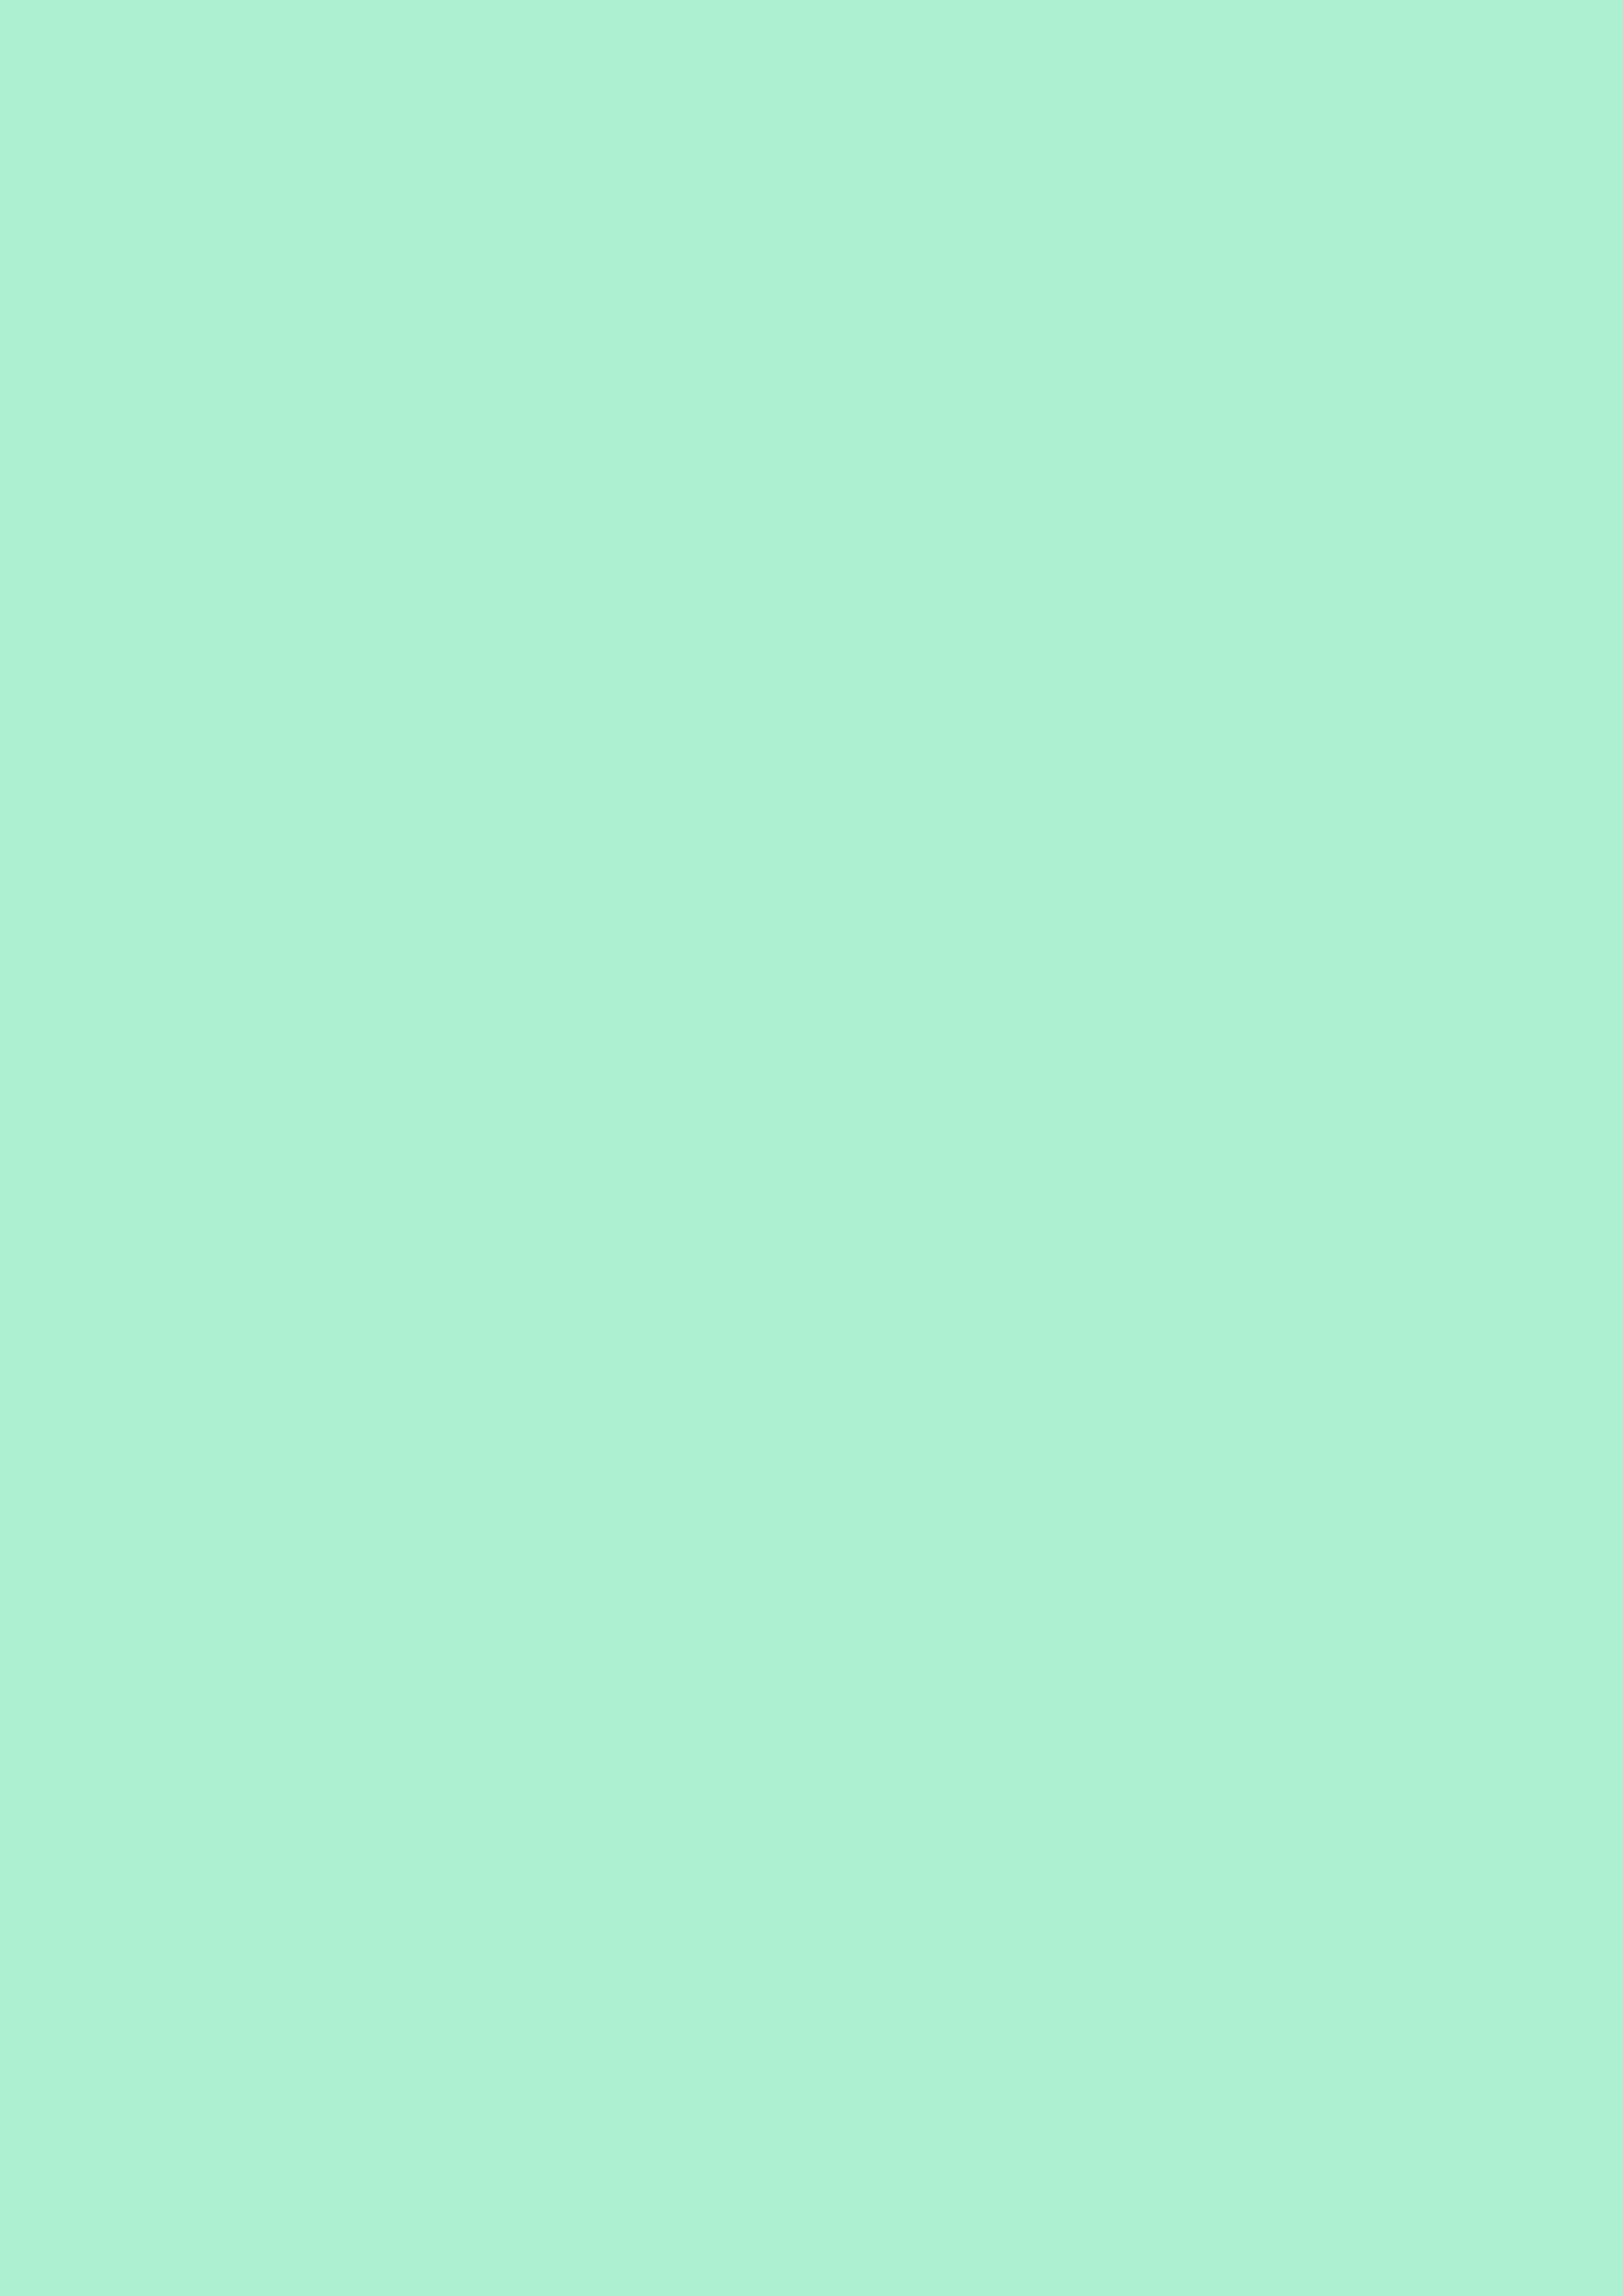 2480x3508 Magic Mint Solid Color Background